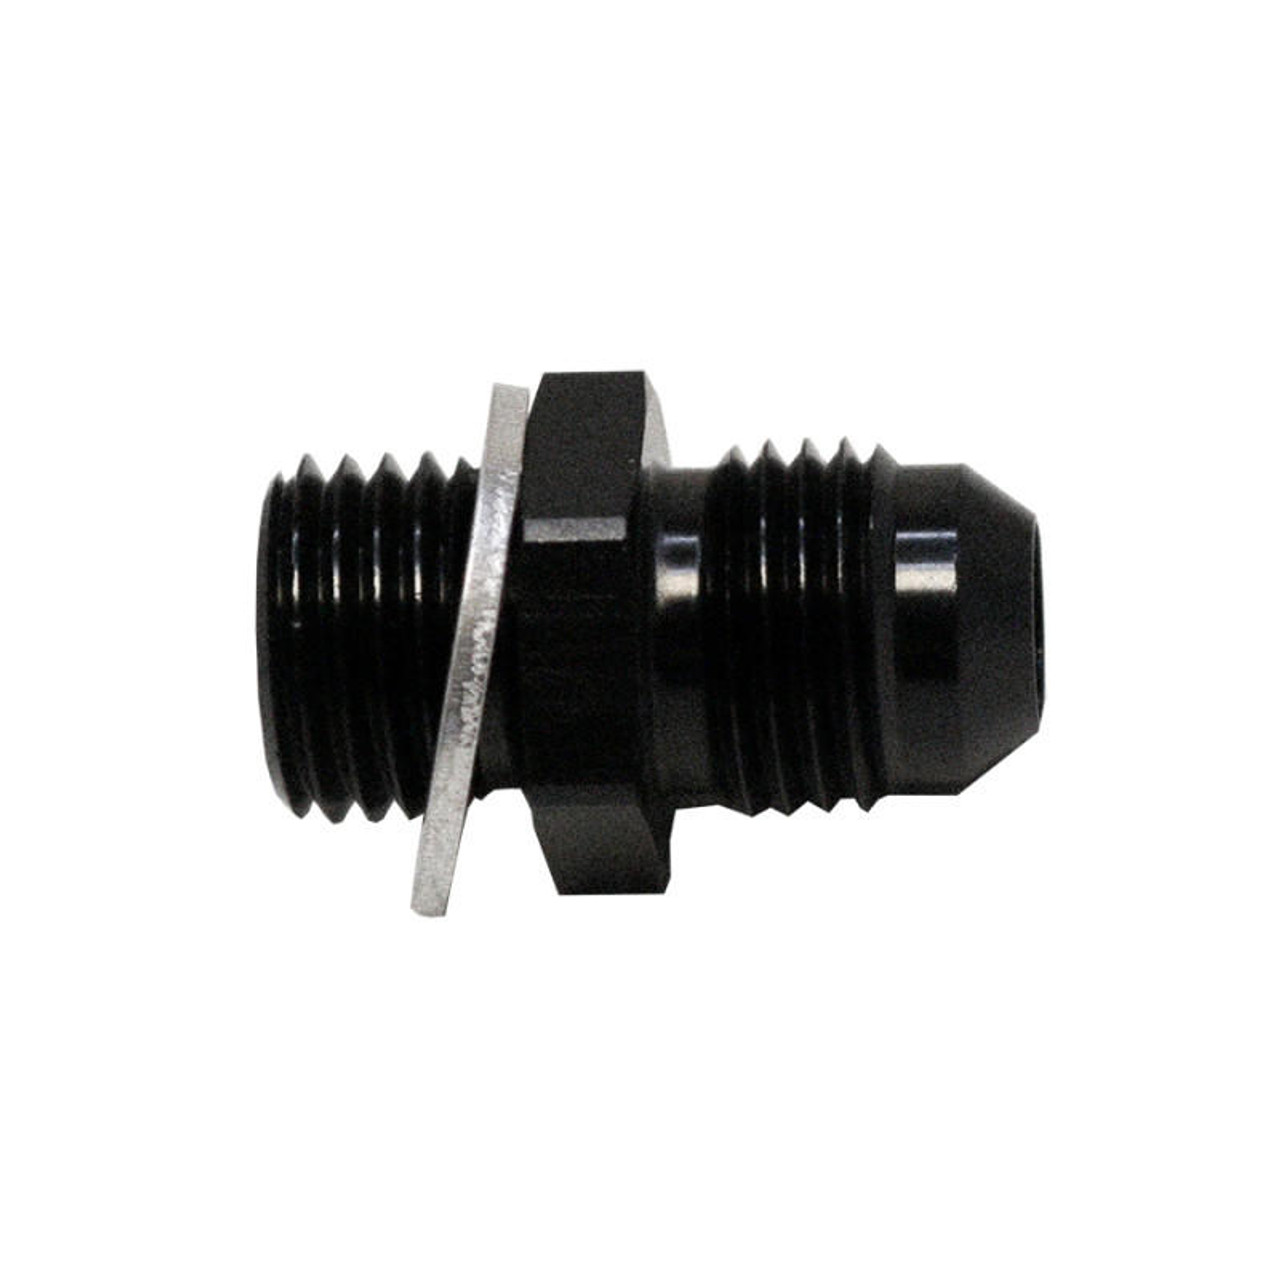 DeatschWerks 6AN Male Flare to M14 X 1.5 Male Metric Adapter Incl Washer - Anodized Matte Black - 6-02-0614-B